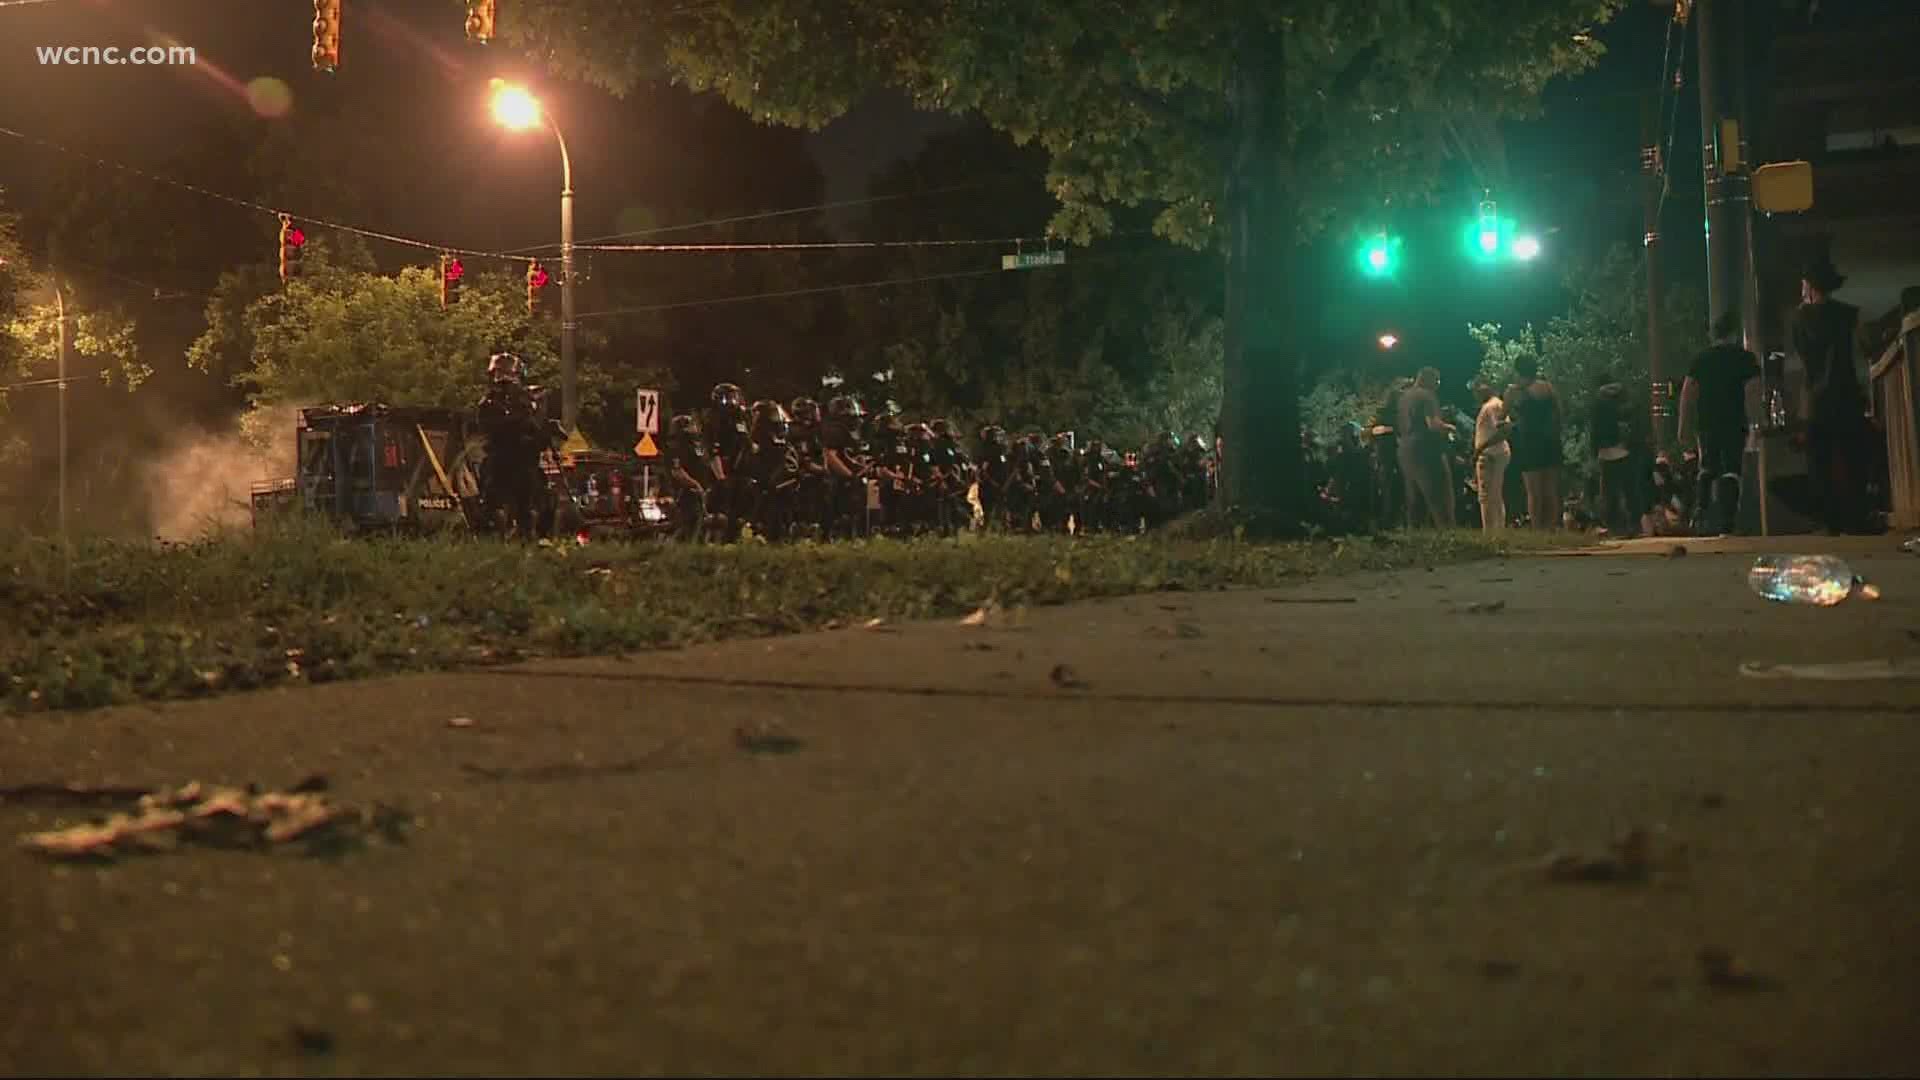 The Charlotte-Mecklenburg Police Department says they welcome peaceful protests, but when things turn violent, they must respond.